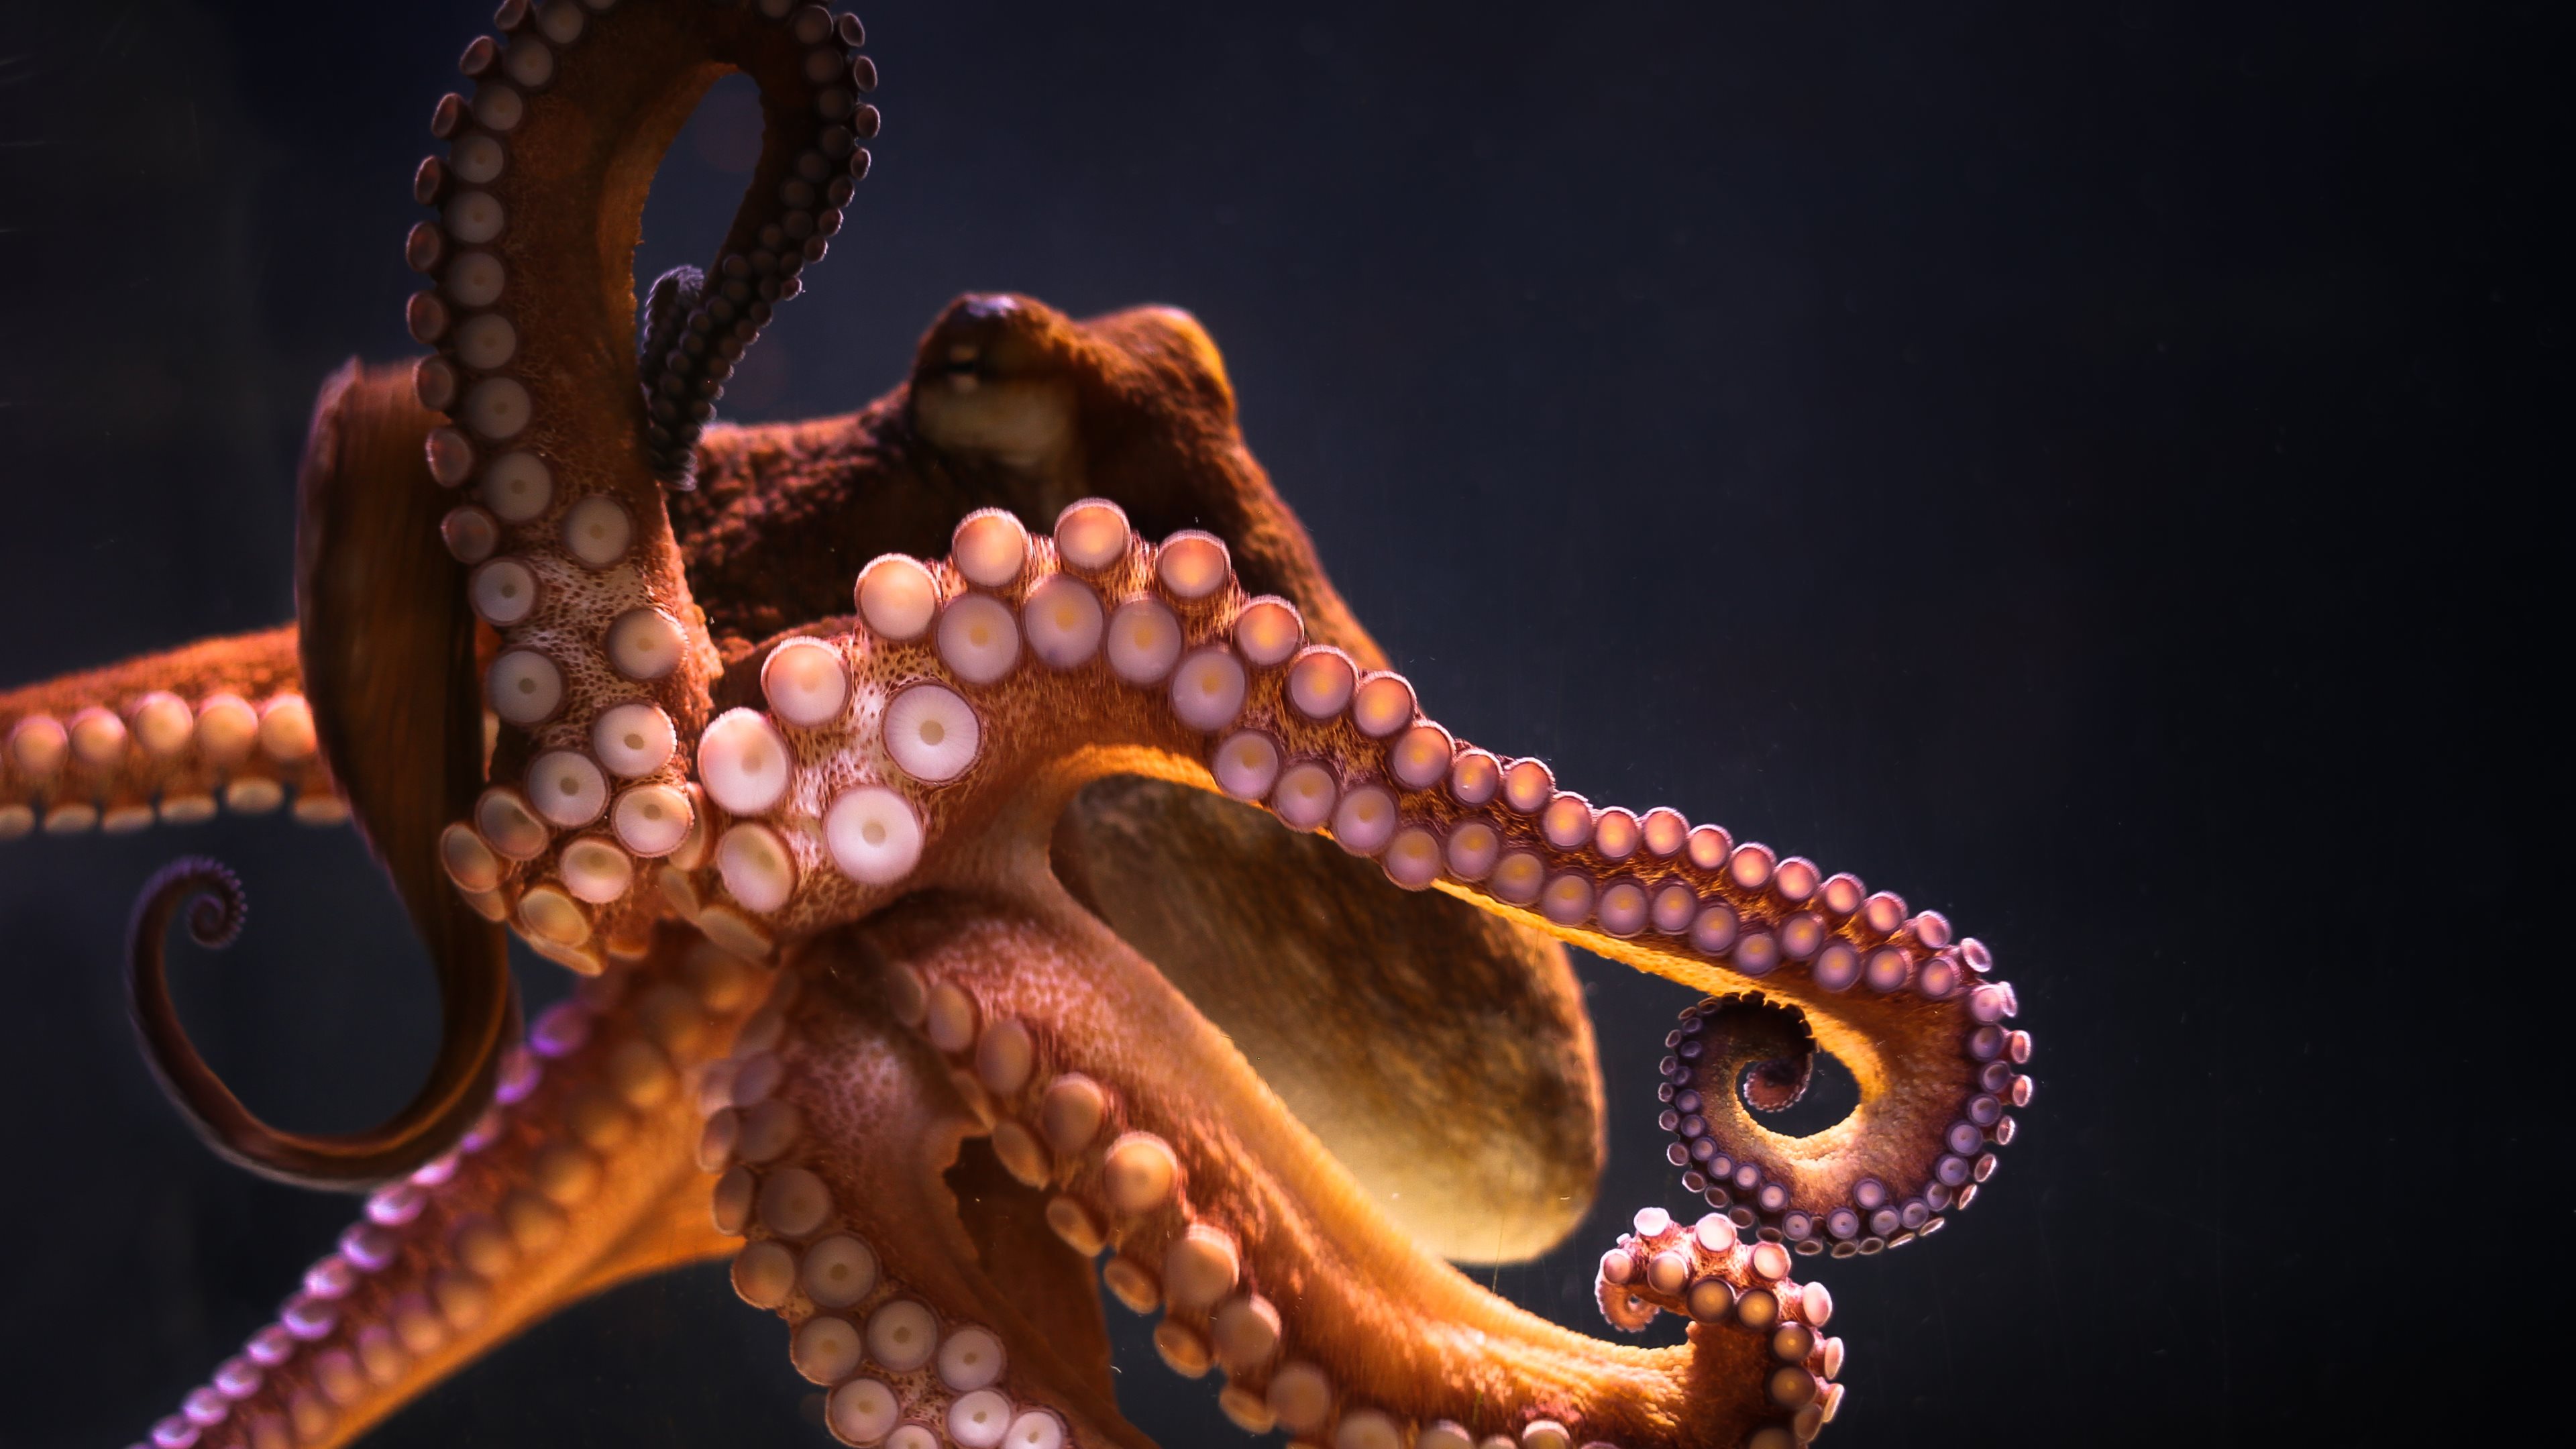 Octopus HD Wallpaper Background Image